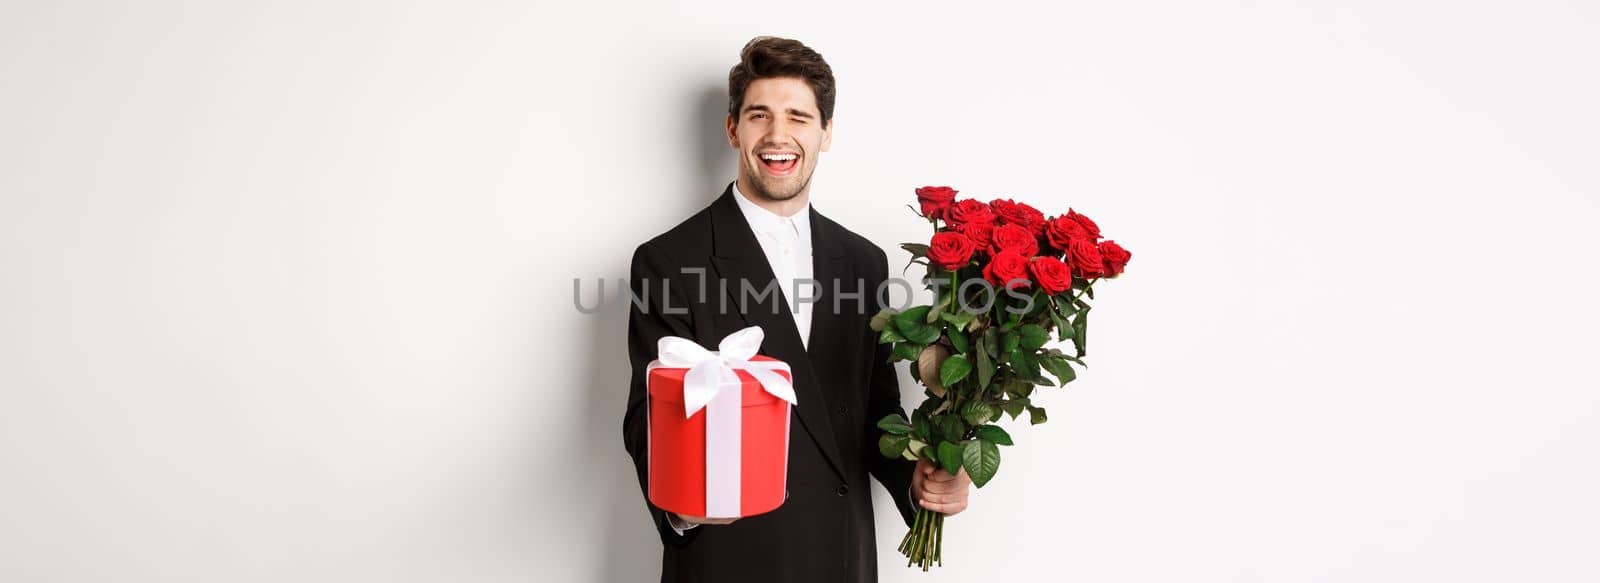 Concept of holidays, relationship and celebration. Charming young man in black suit, holding gift box and bouquet of roses, winking and smiling, standing against white background.